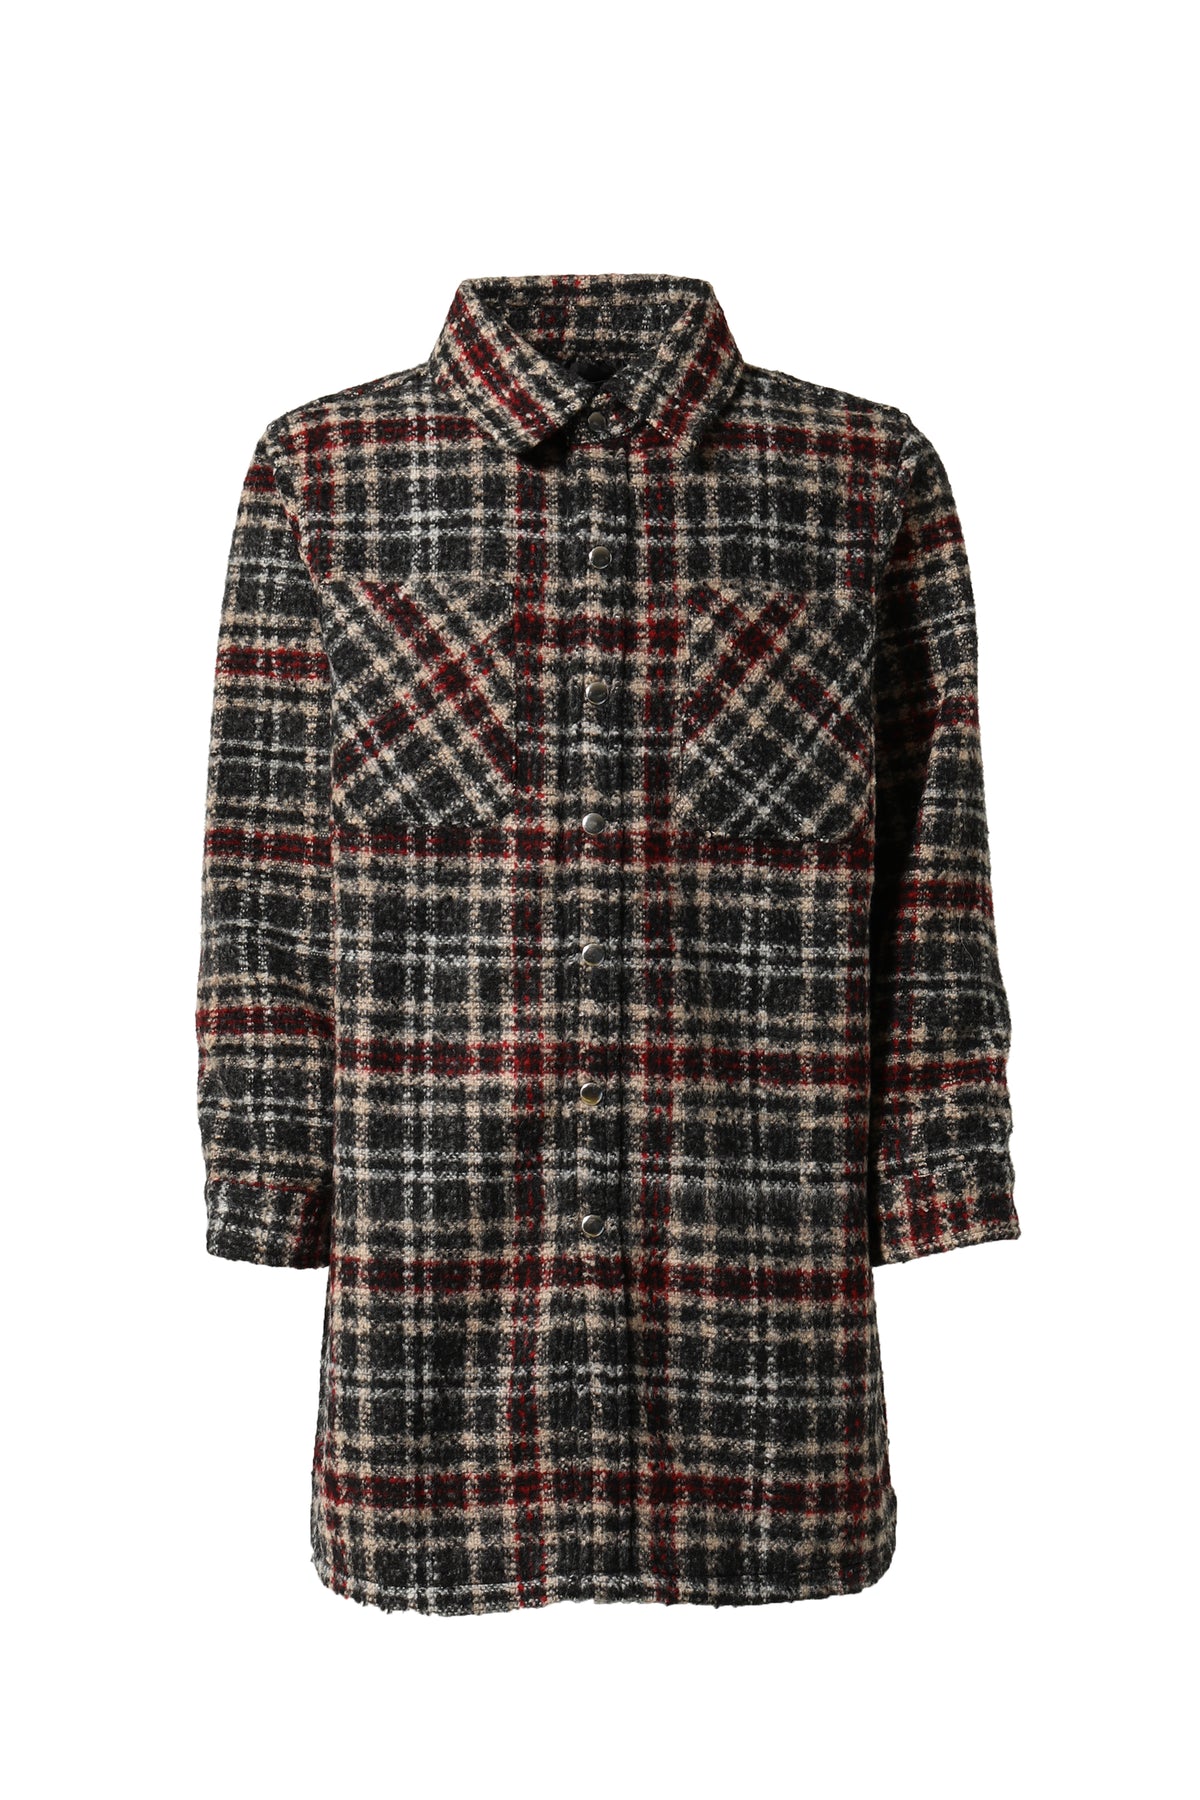 LAST NEST FLANNEL OVER LONG SHIRTS / BLK/RED